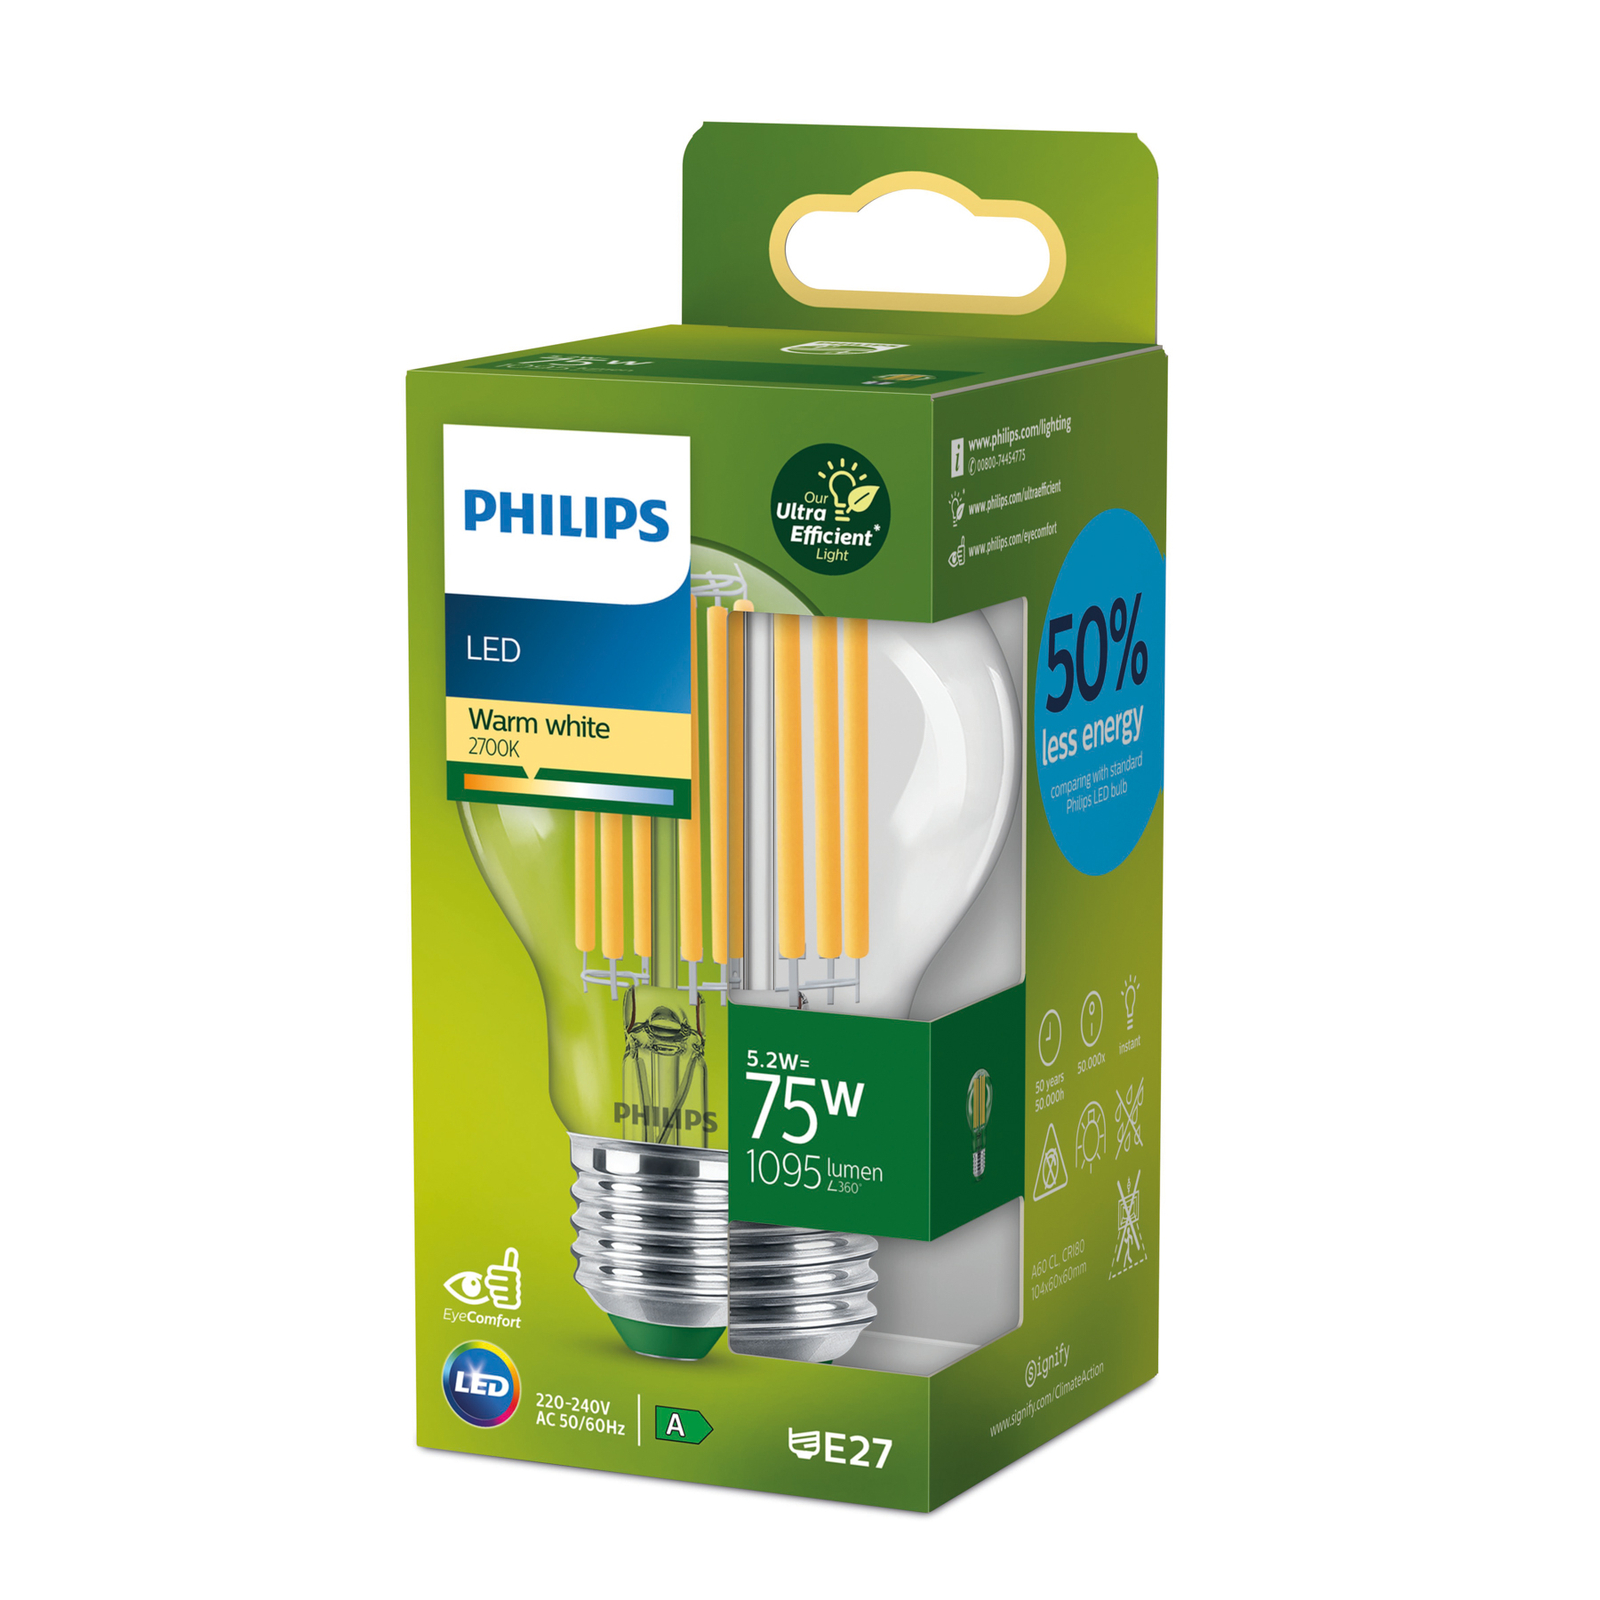 Philips E27 Lamp A60 5.2W 1095lm 2,700K clear